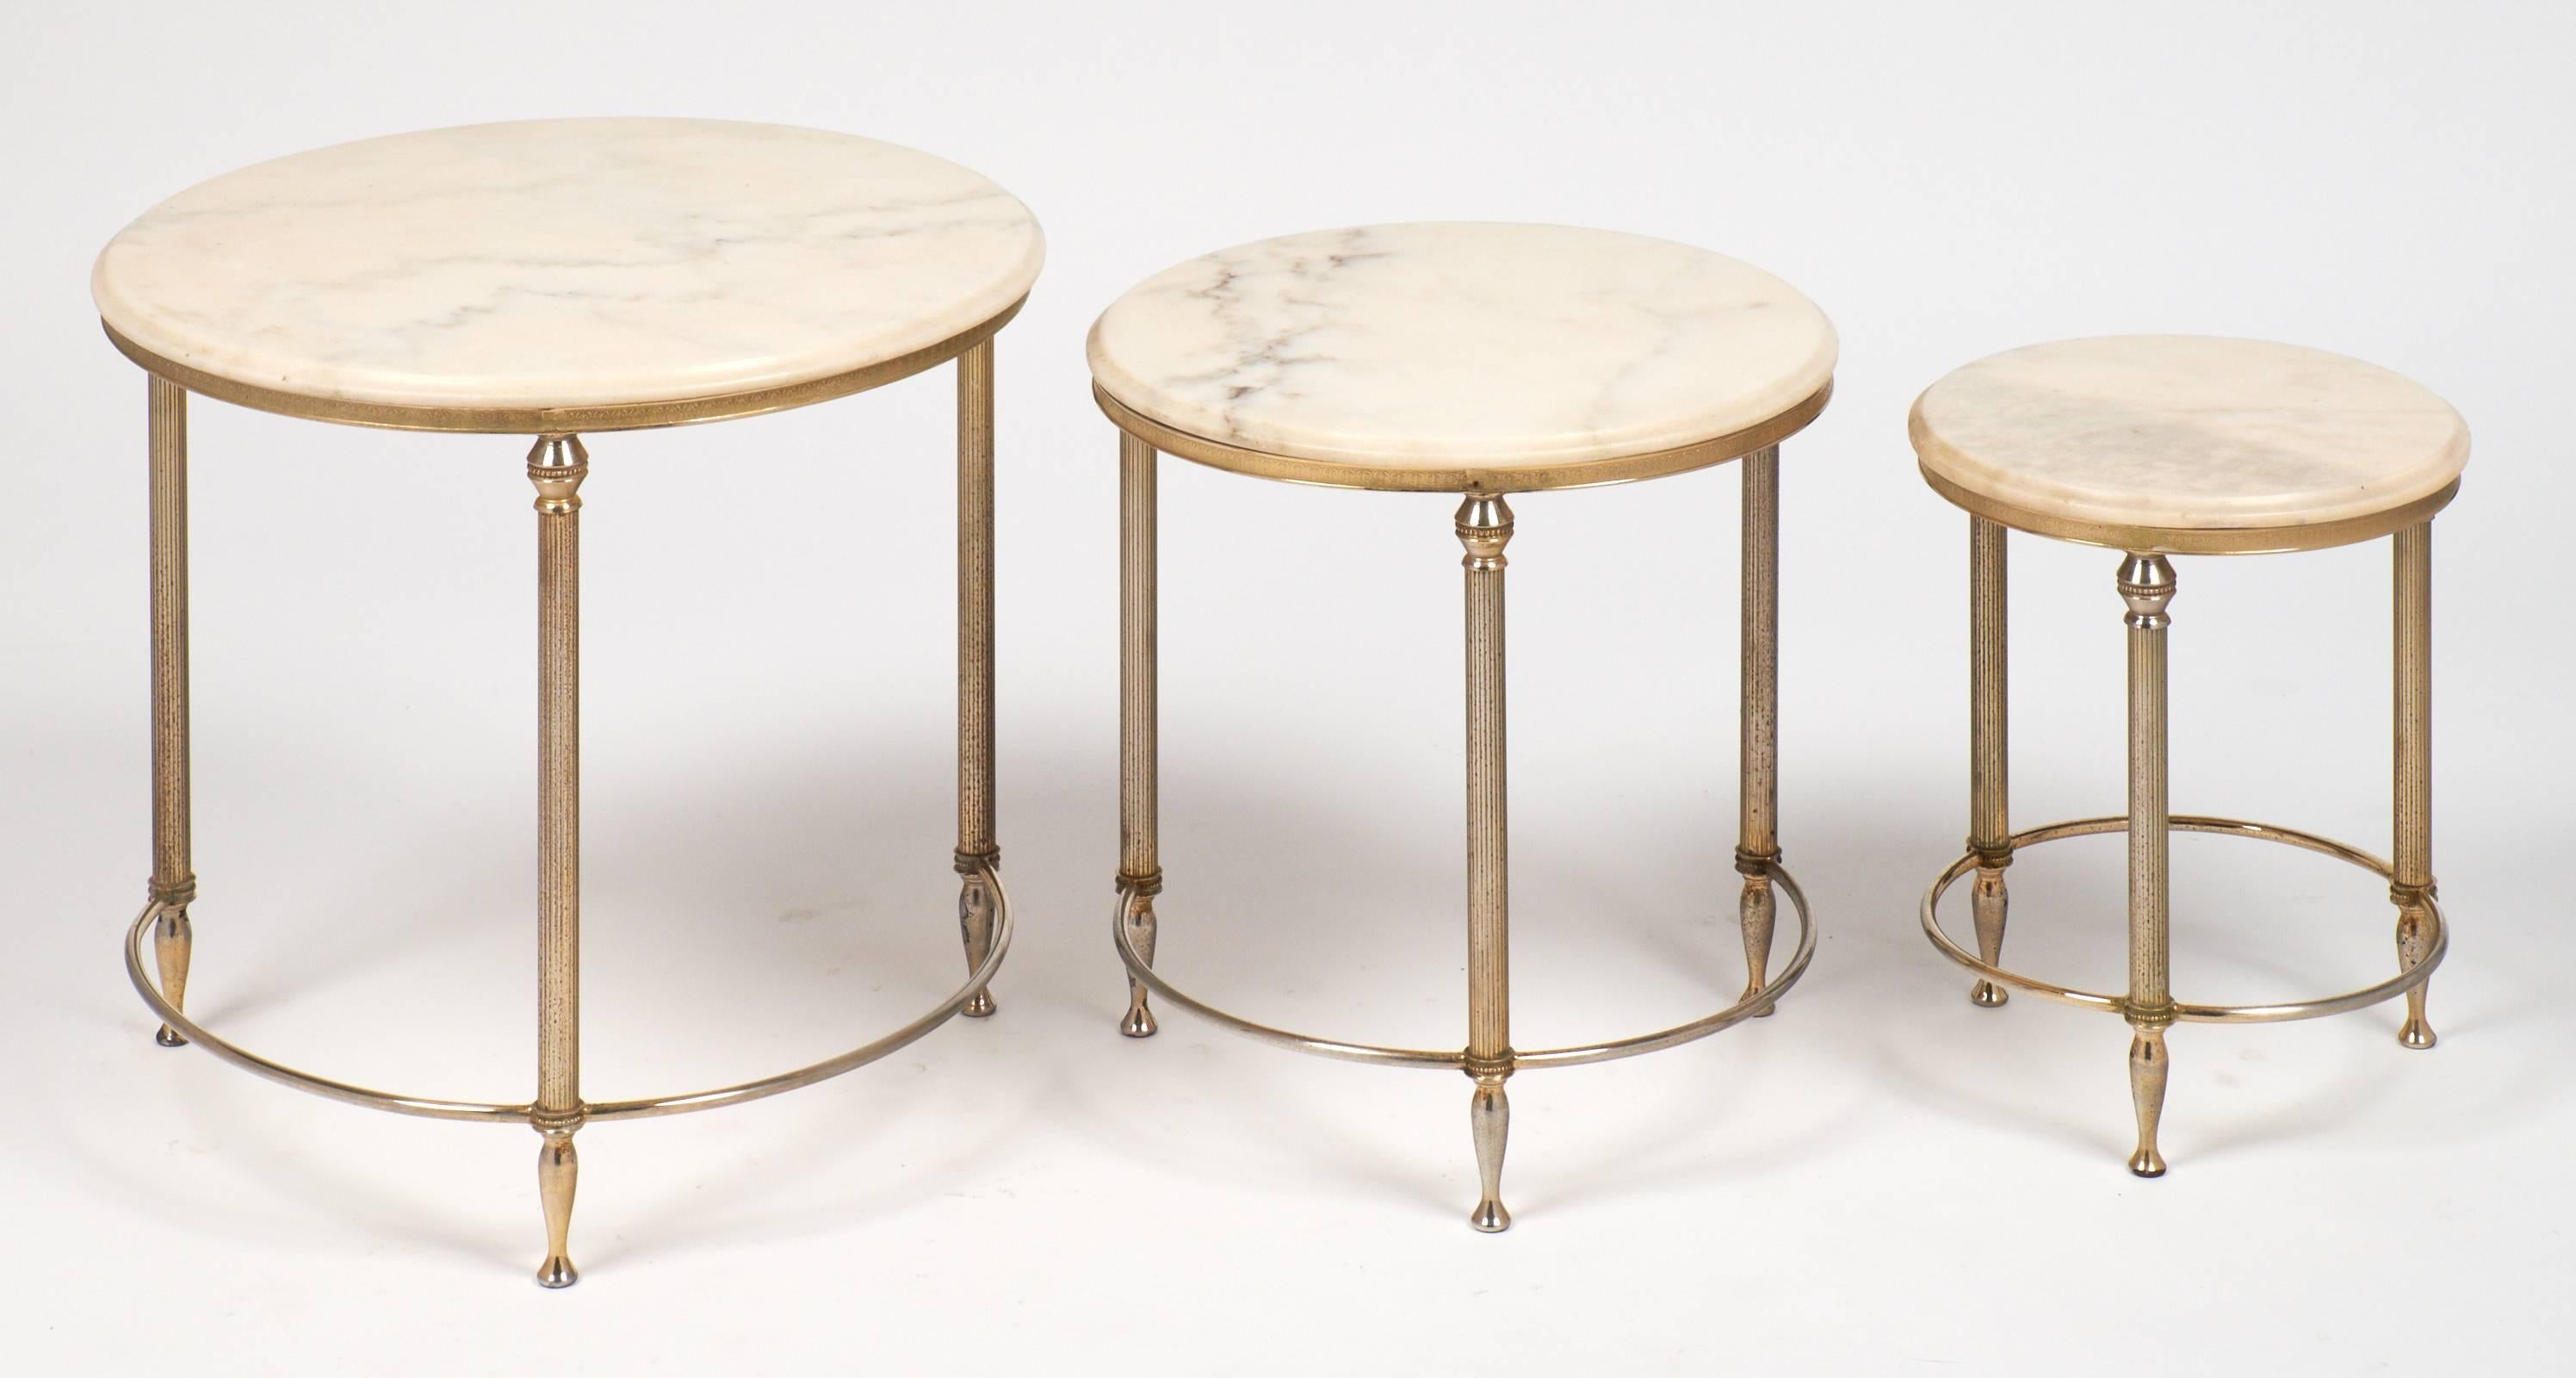 Cast French Neoclassic Set of Three Onyx-Top Bronze Nesting Tables